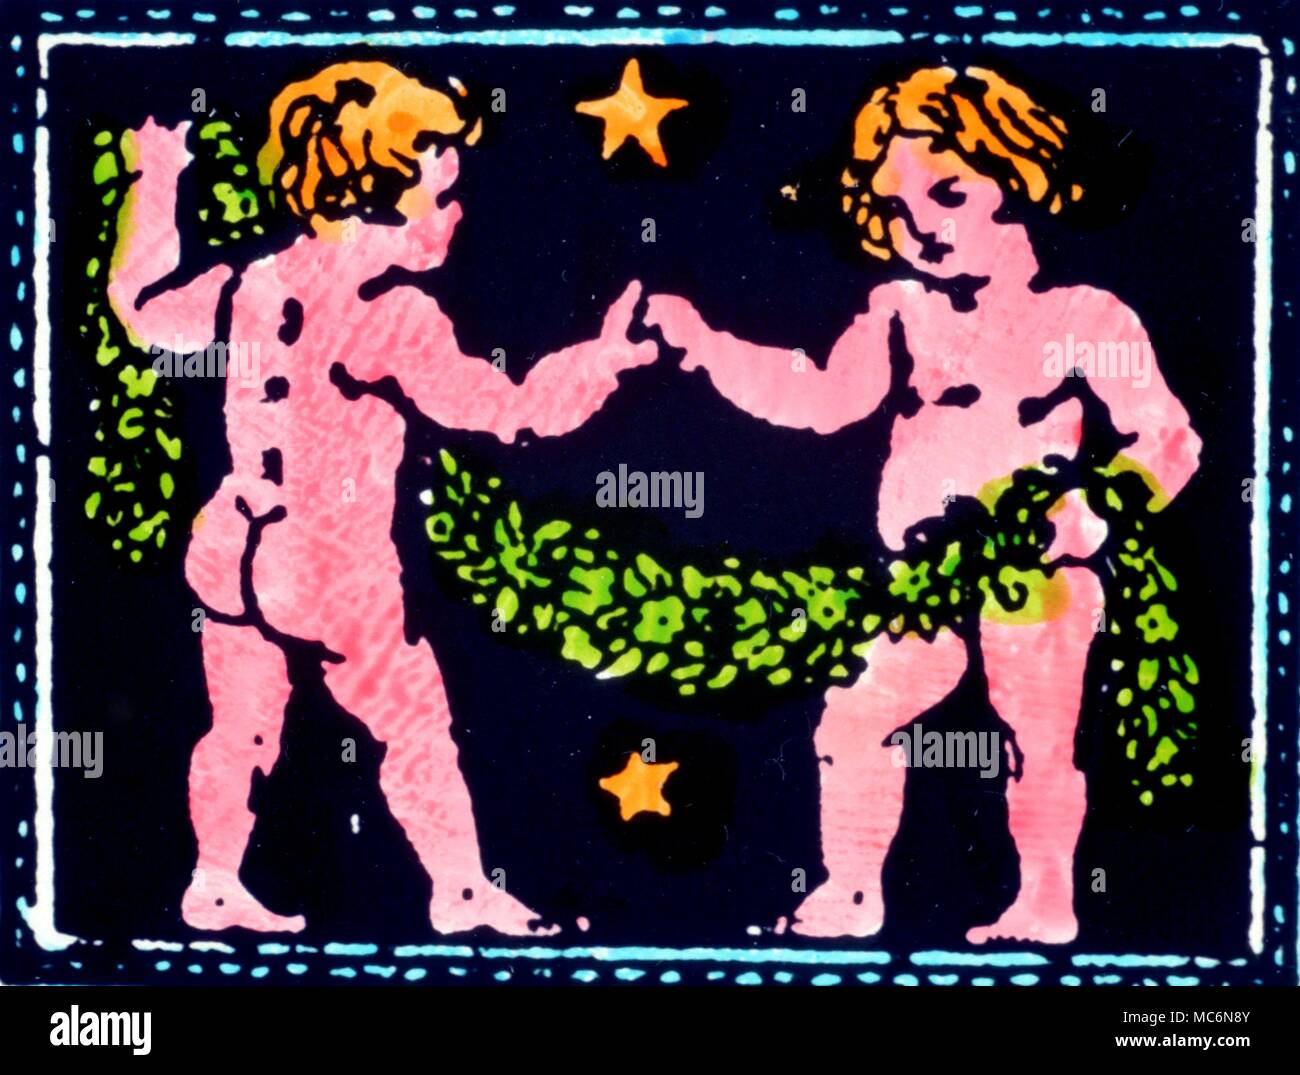 Zodiacal Signs Gemini Image of Gemini from a late 19th century textbook on astrology Stock Photo